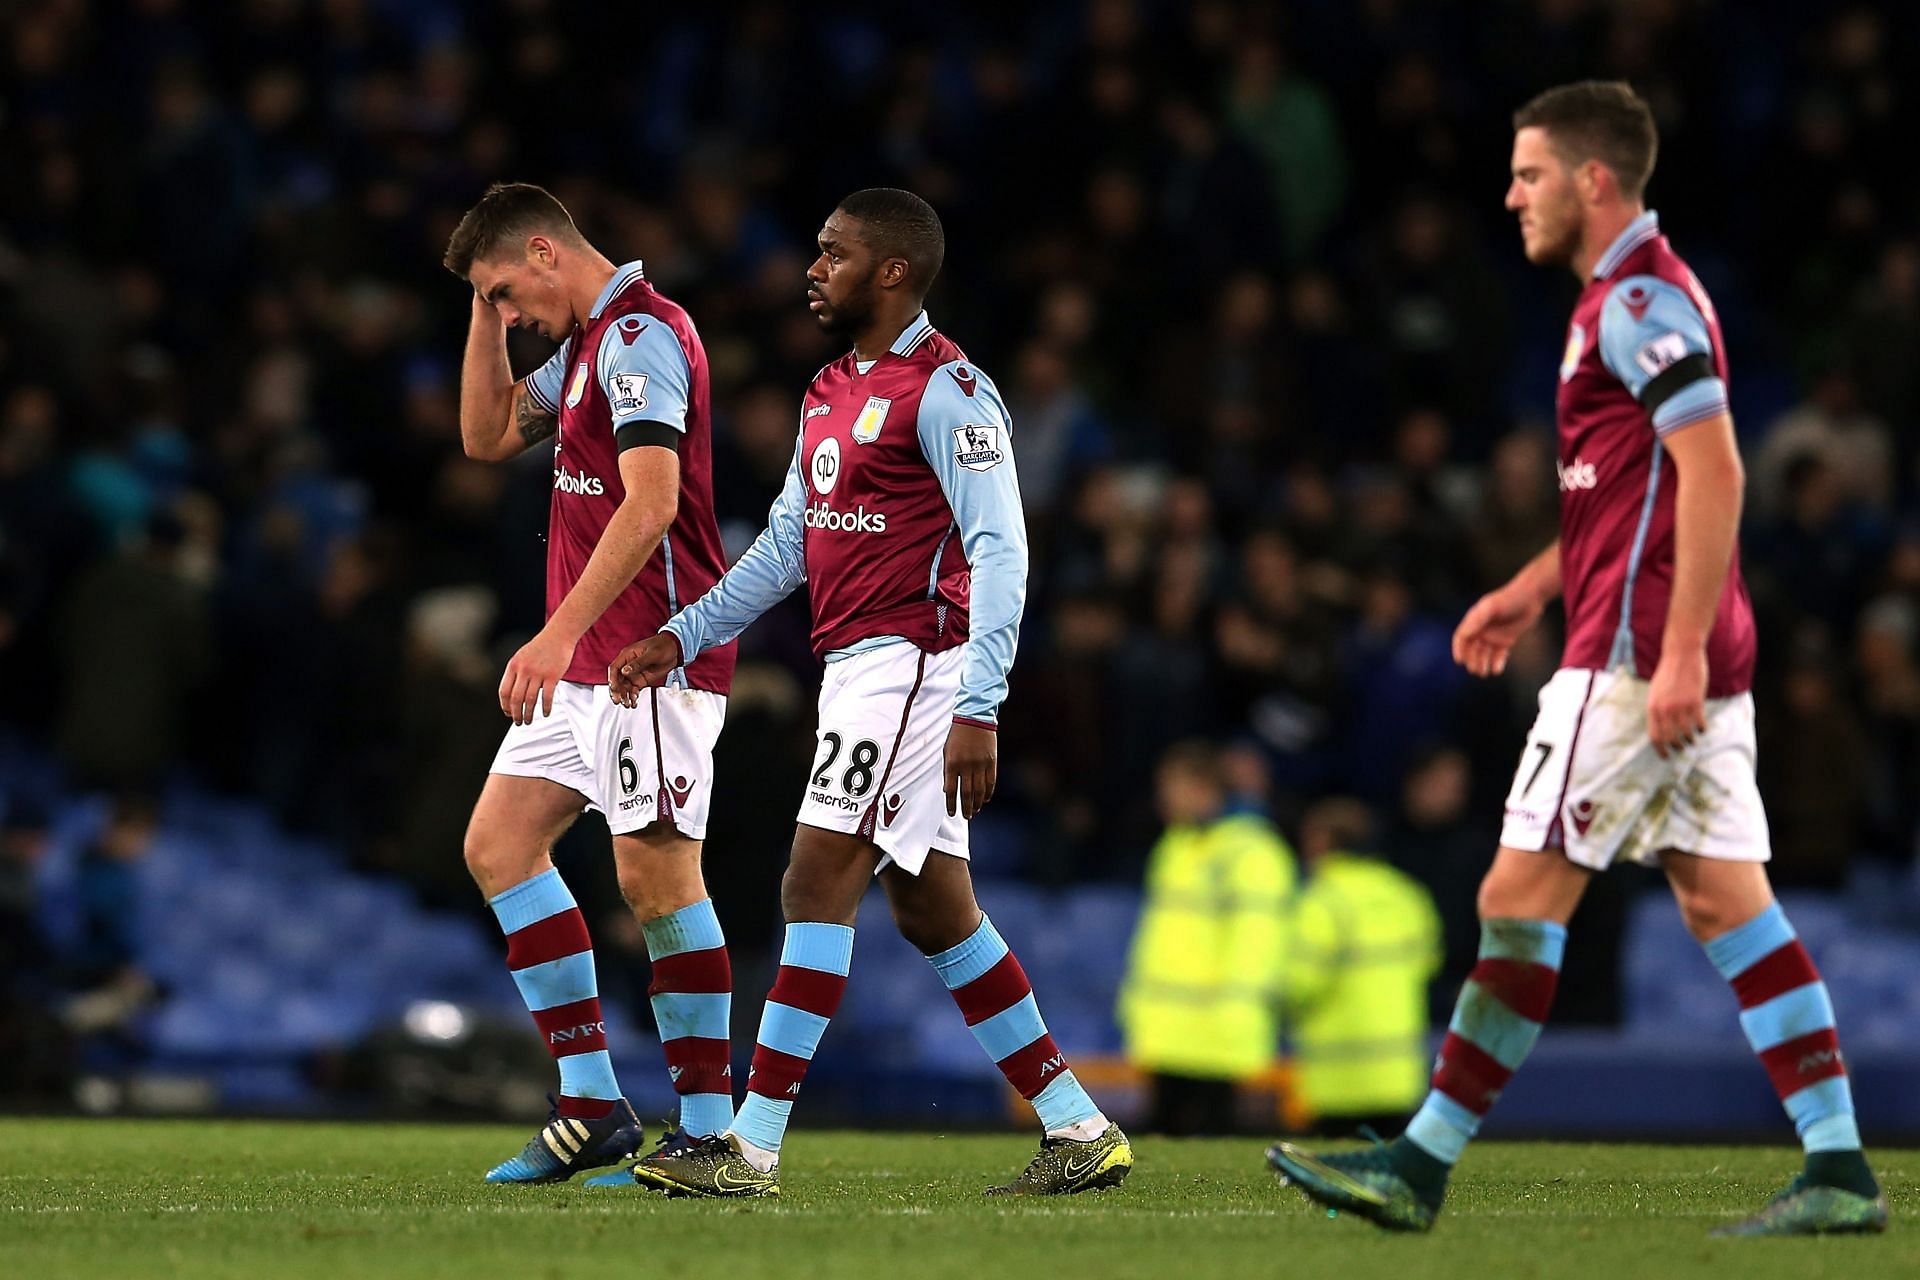 Aston Villa players feeling dejected after a loss against Everton